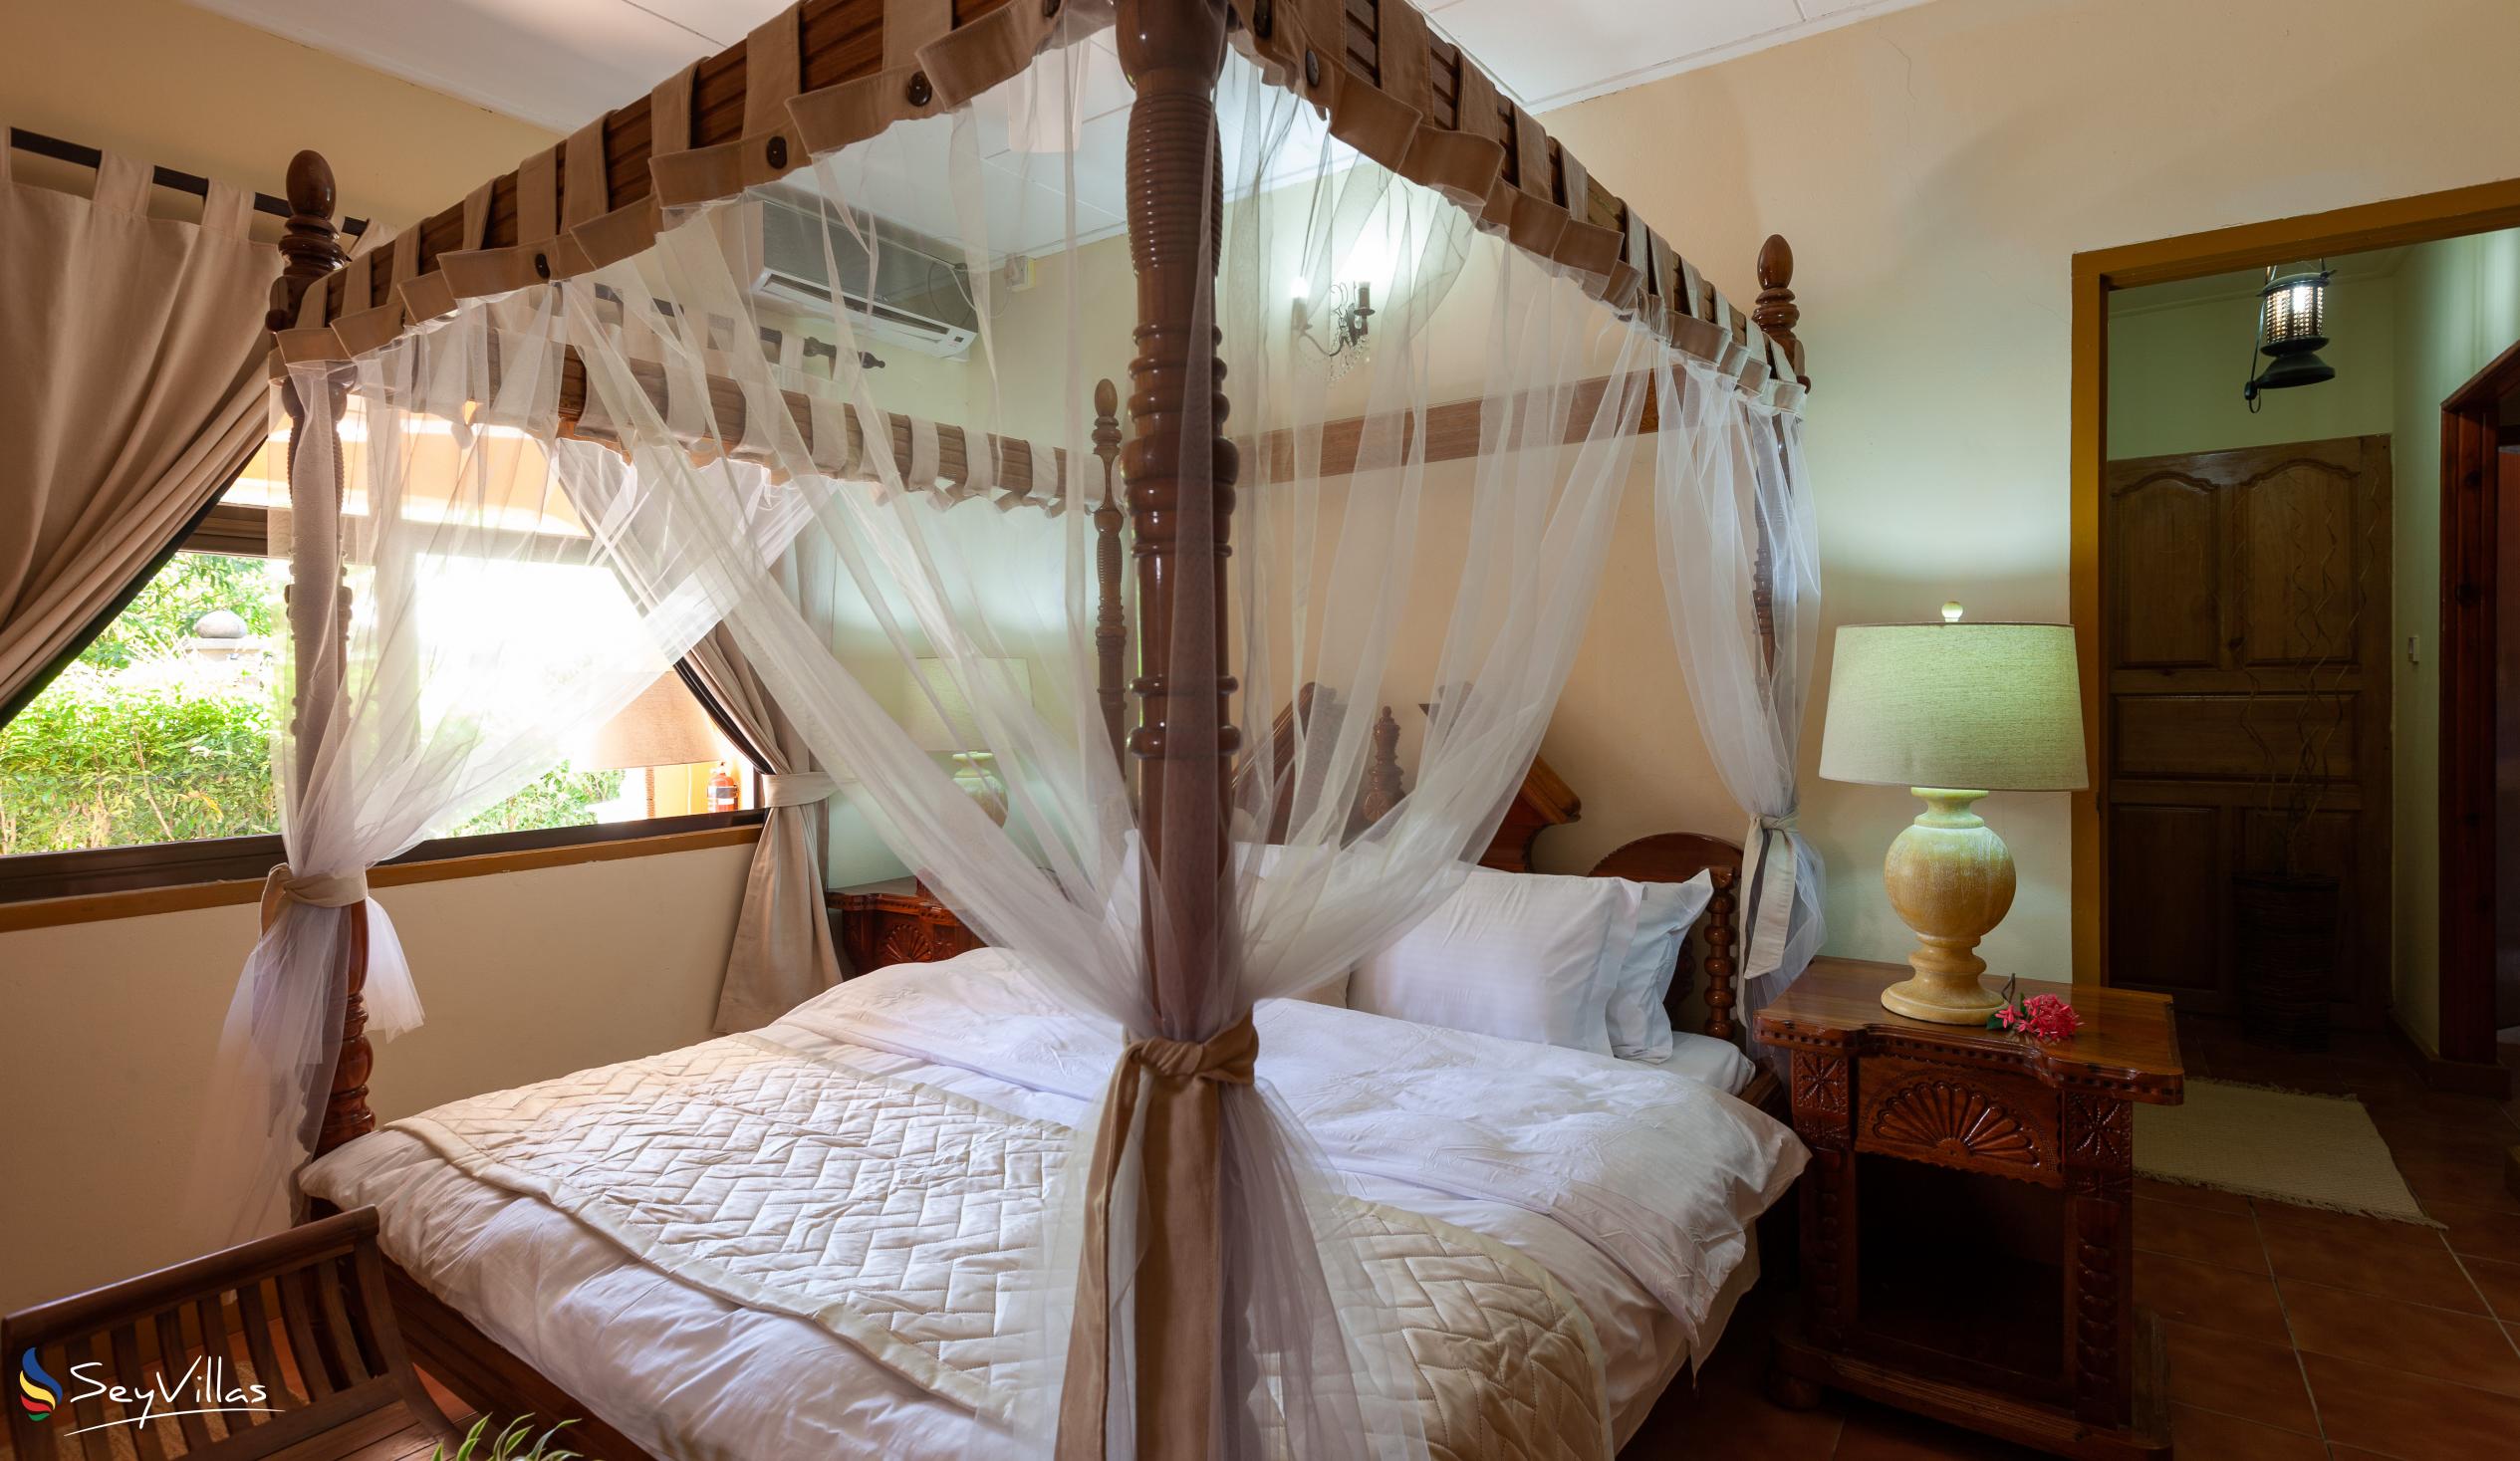 Photo 37: Oceane Self Catering - Family Room - La Digue (Seychelles)